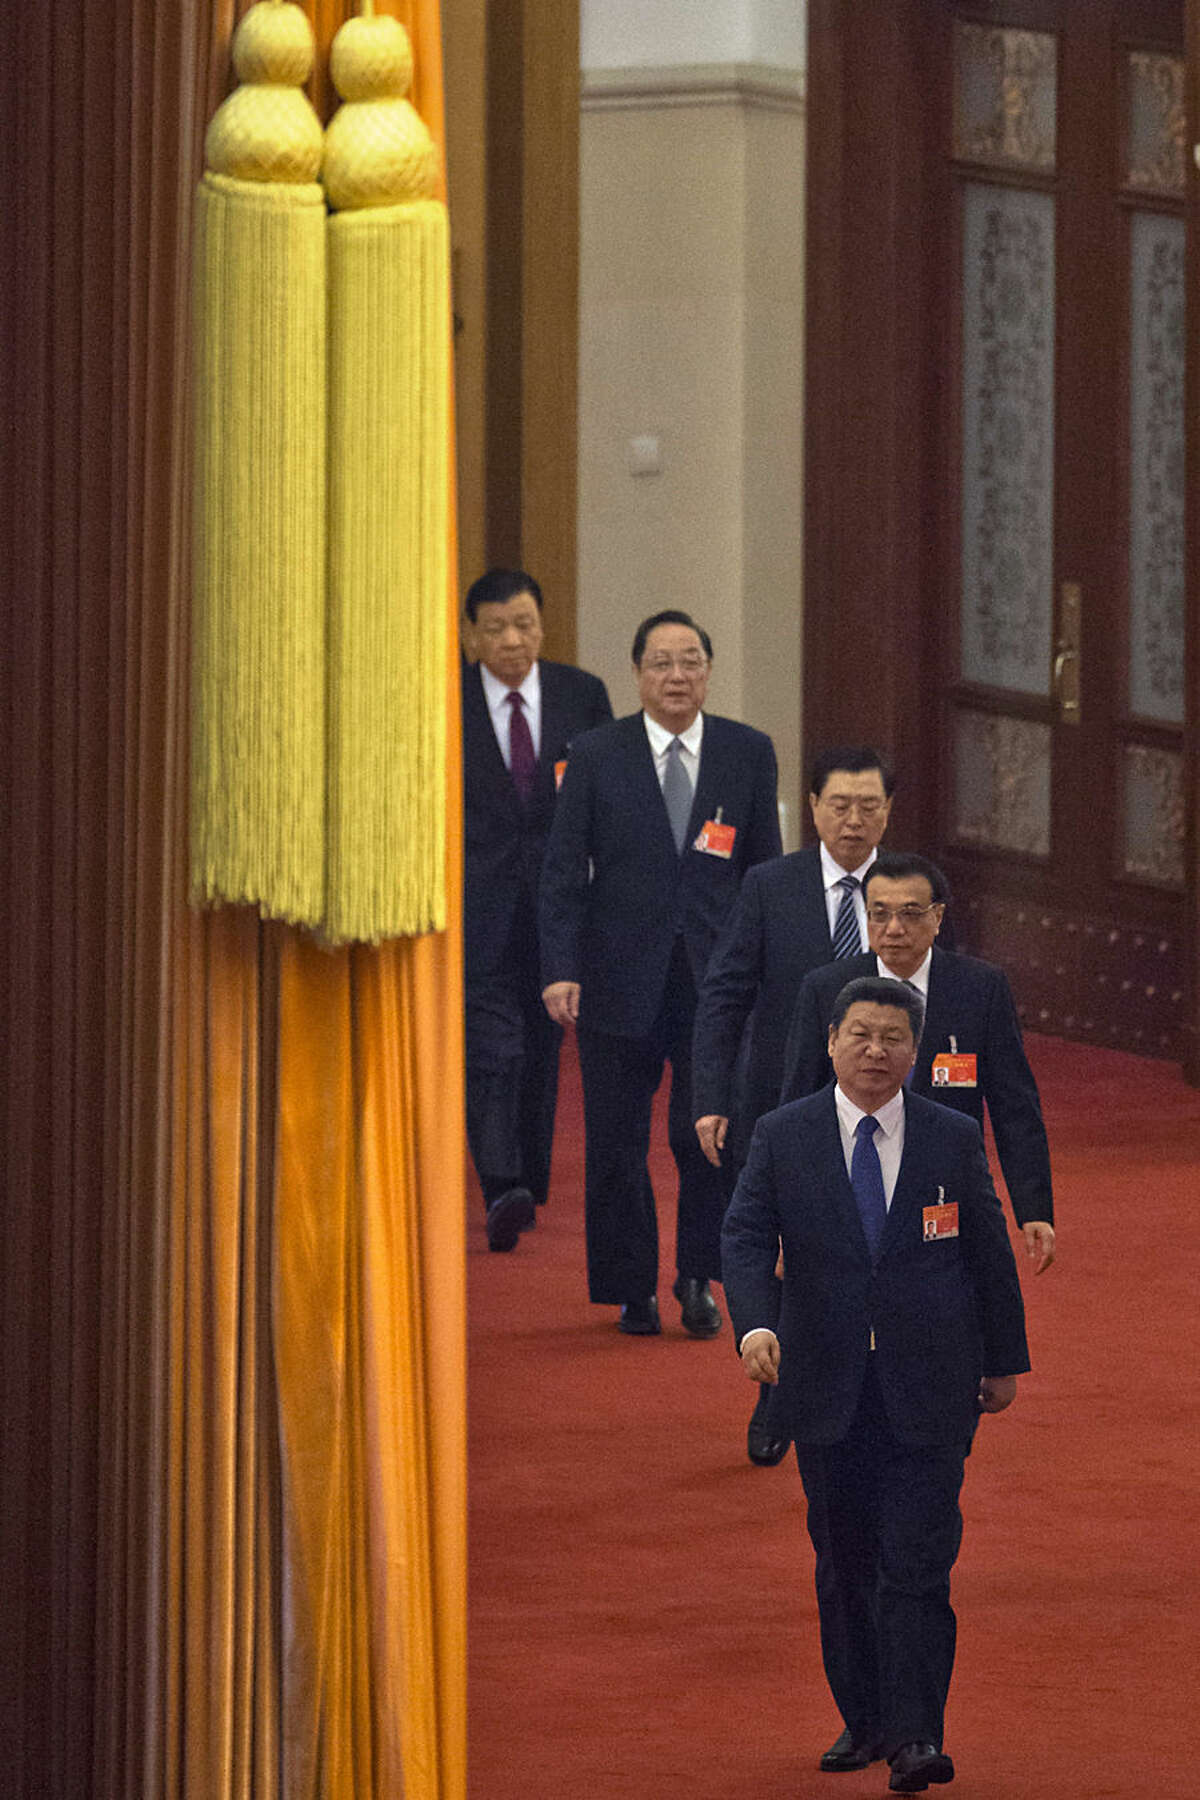 Chinese President Xi Jinping, front, leads the members of the Politburo Standing Committee as they arrive for a plenary session of the National People's Congress in the Great Hall of the People in Beijing Thursday, March 12, 2015. Behind Xi is Chinese Premier Li Keqiang and Politburo members Zhang Dejiang, Yu Zhengsheng and Liu Yunshan. (AP Photo/Ng Han Guan)